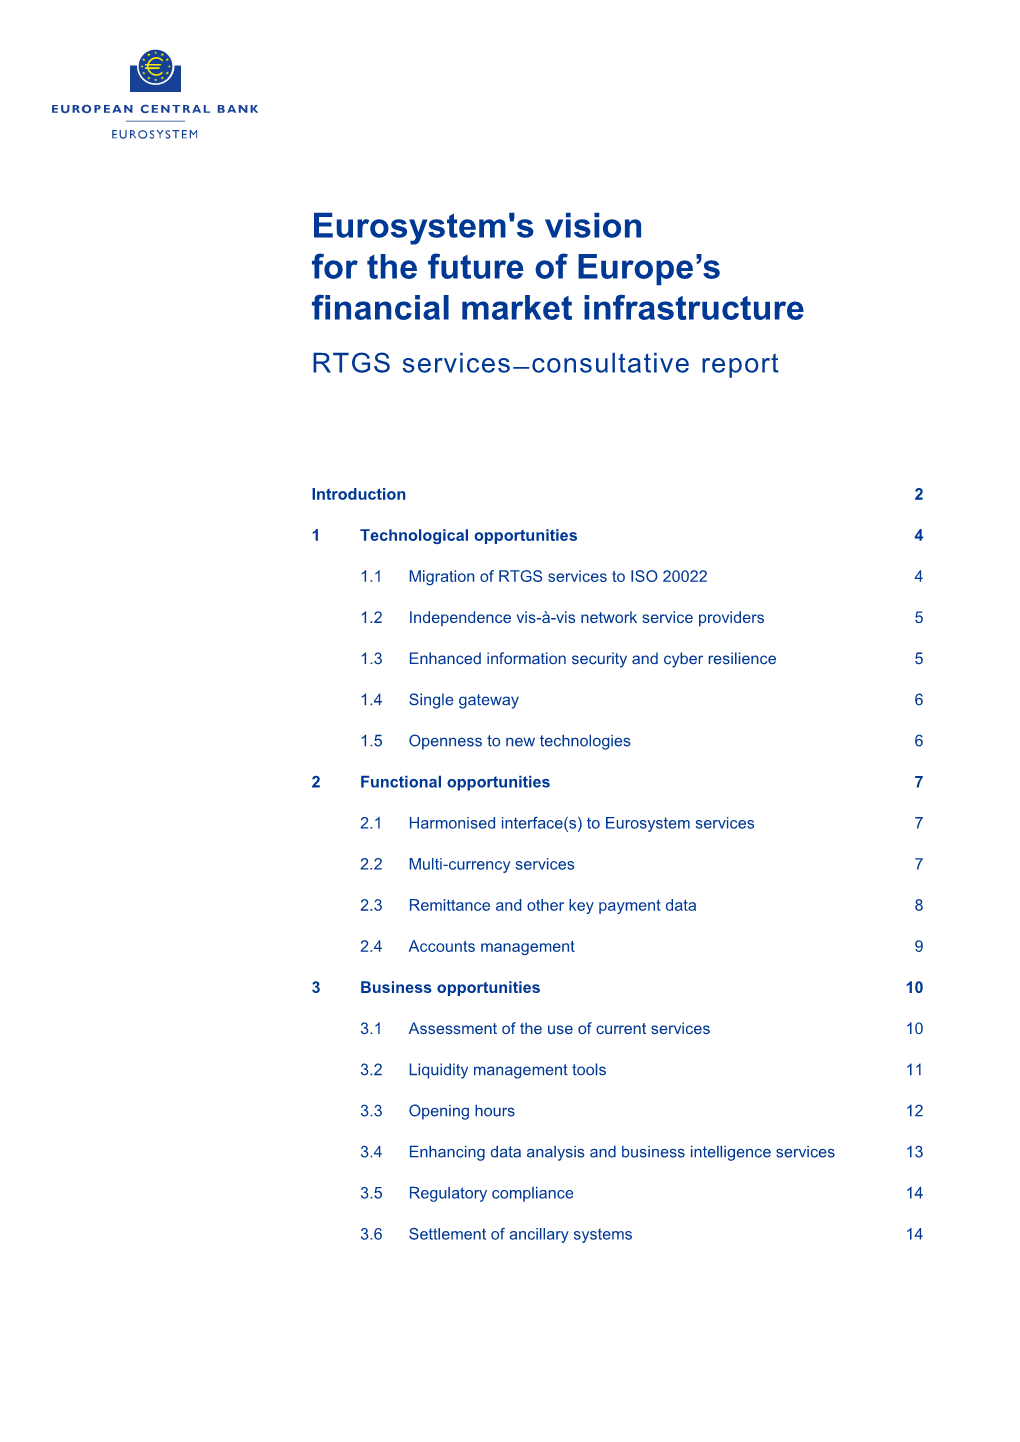 Eurosystem's Vision for the Future of Europe's